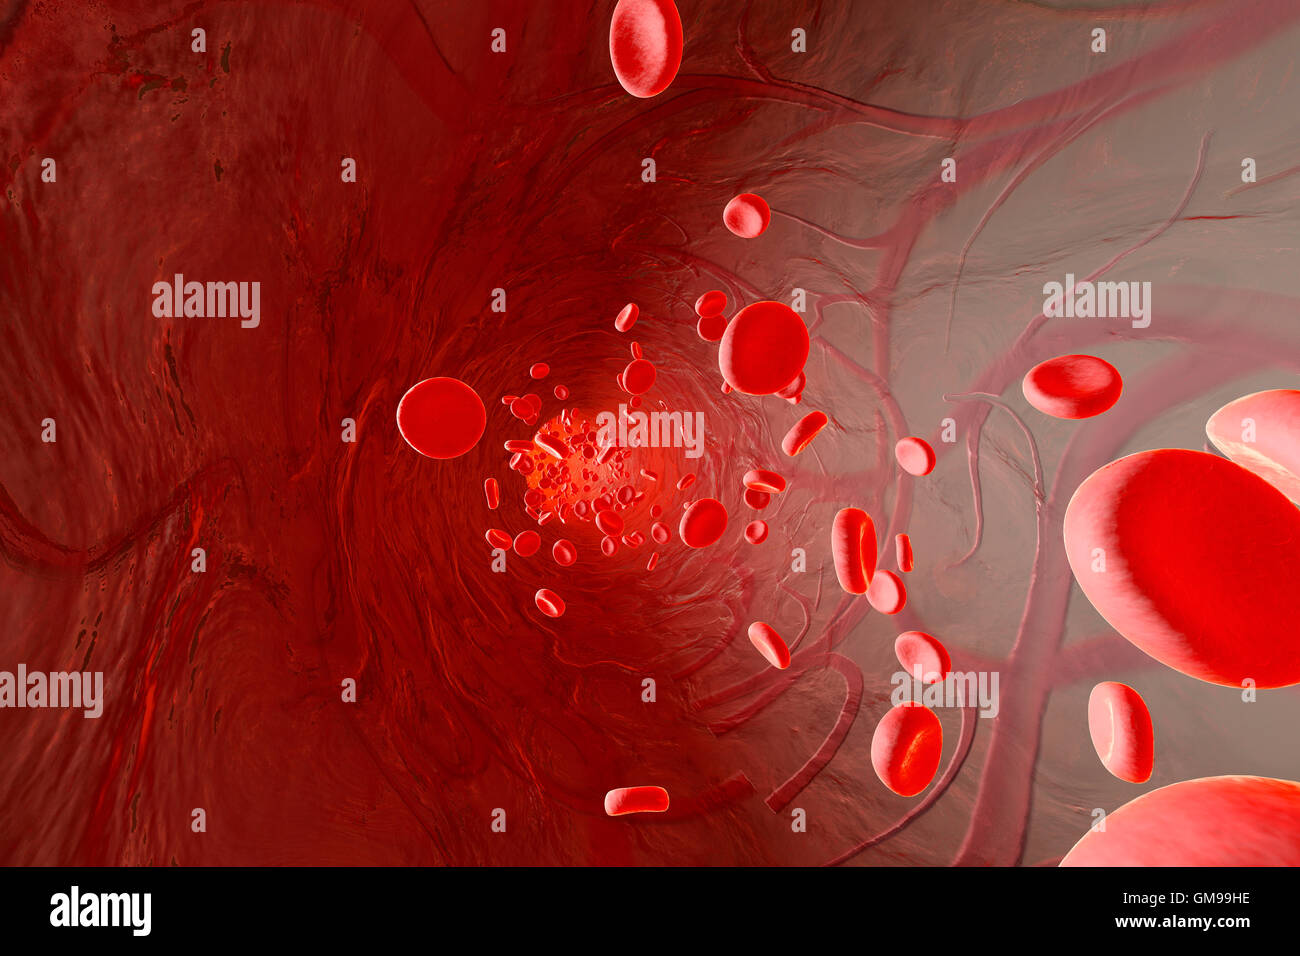 Erythrocyte cells flowing in an artery, 3D Rendering Stock Photo